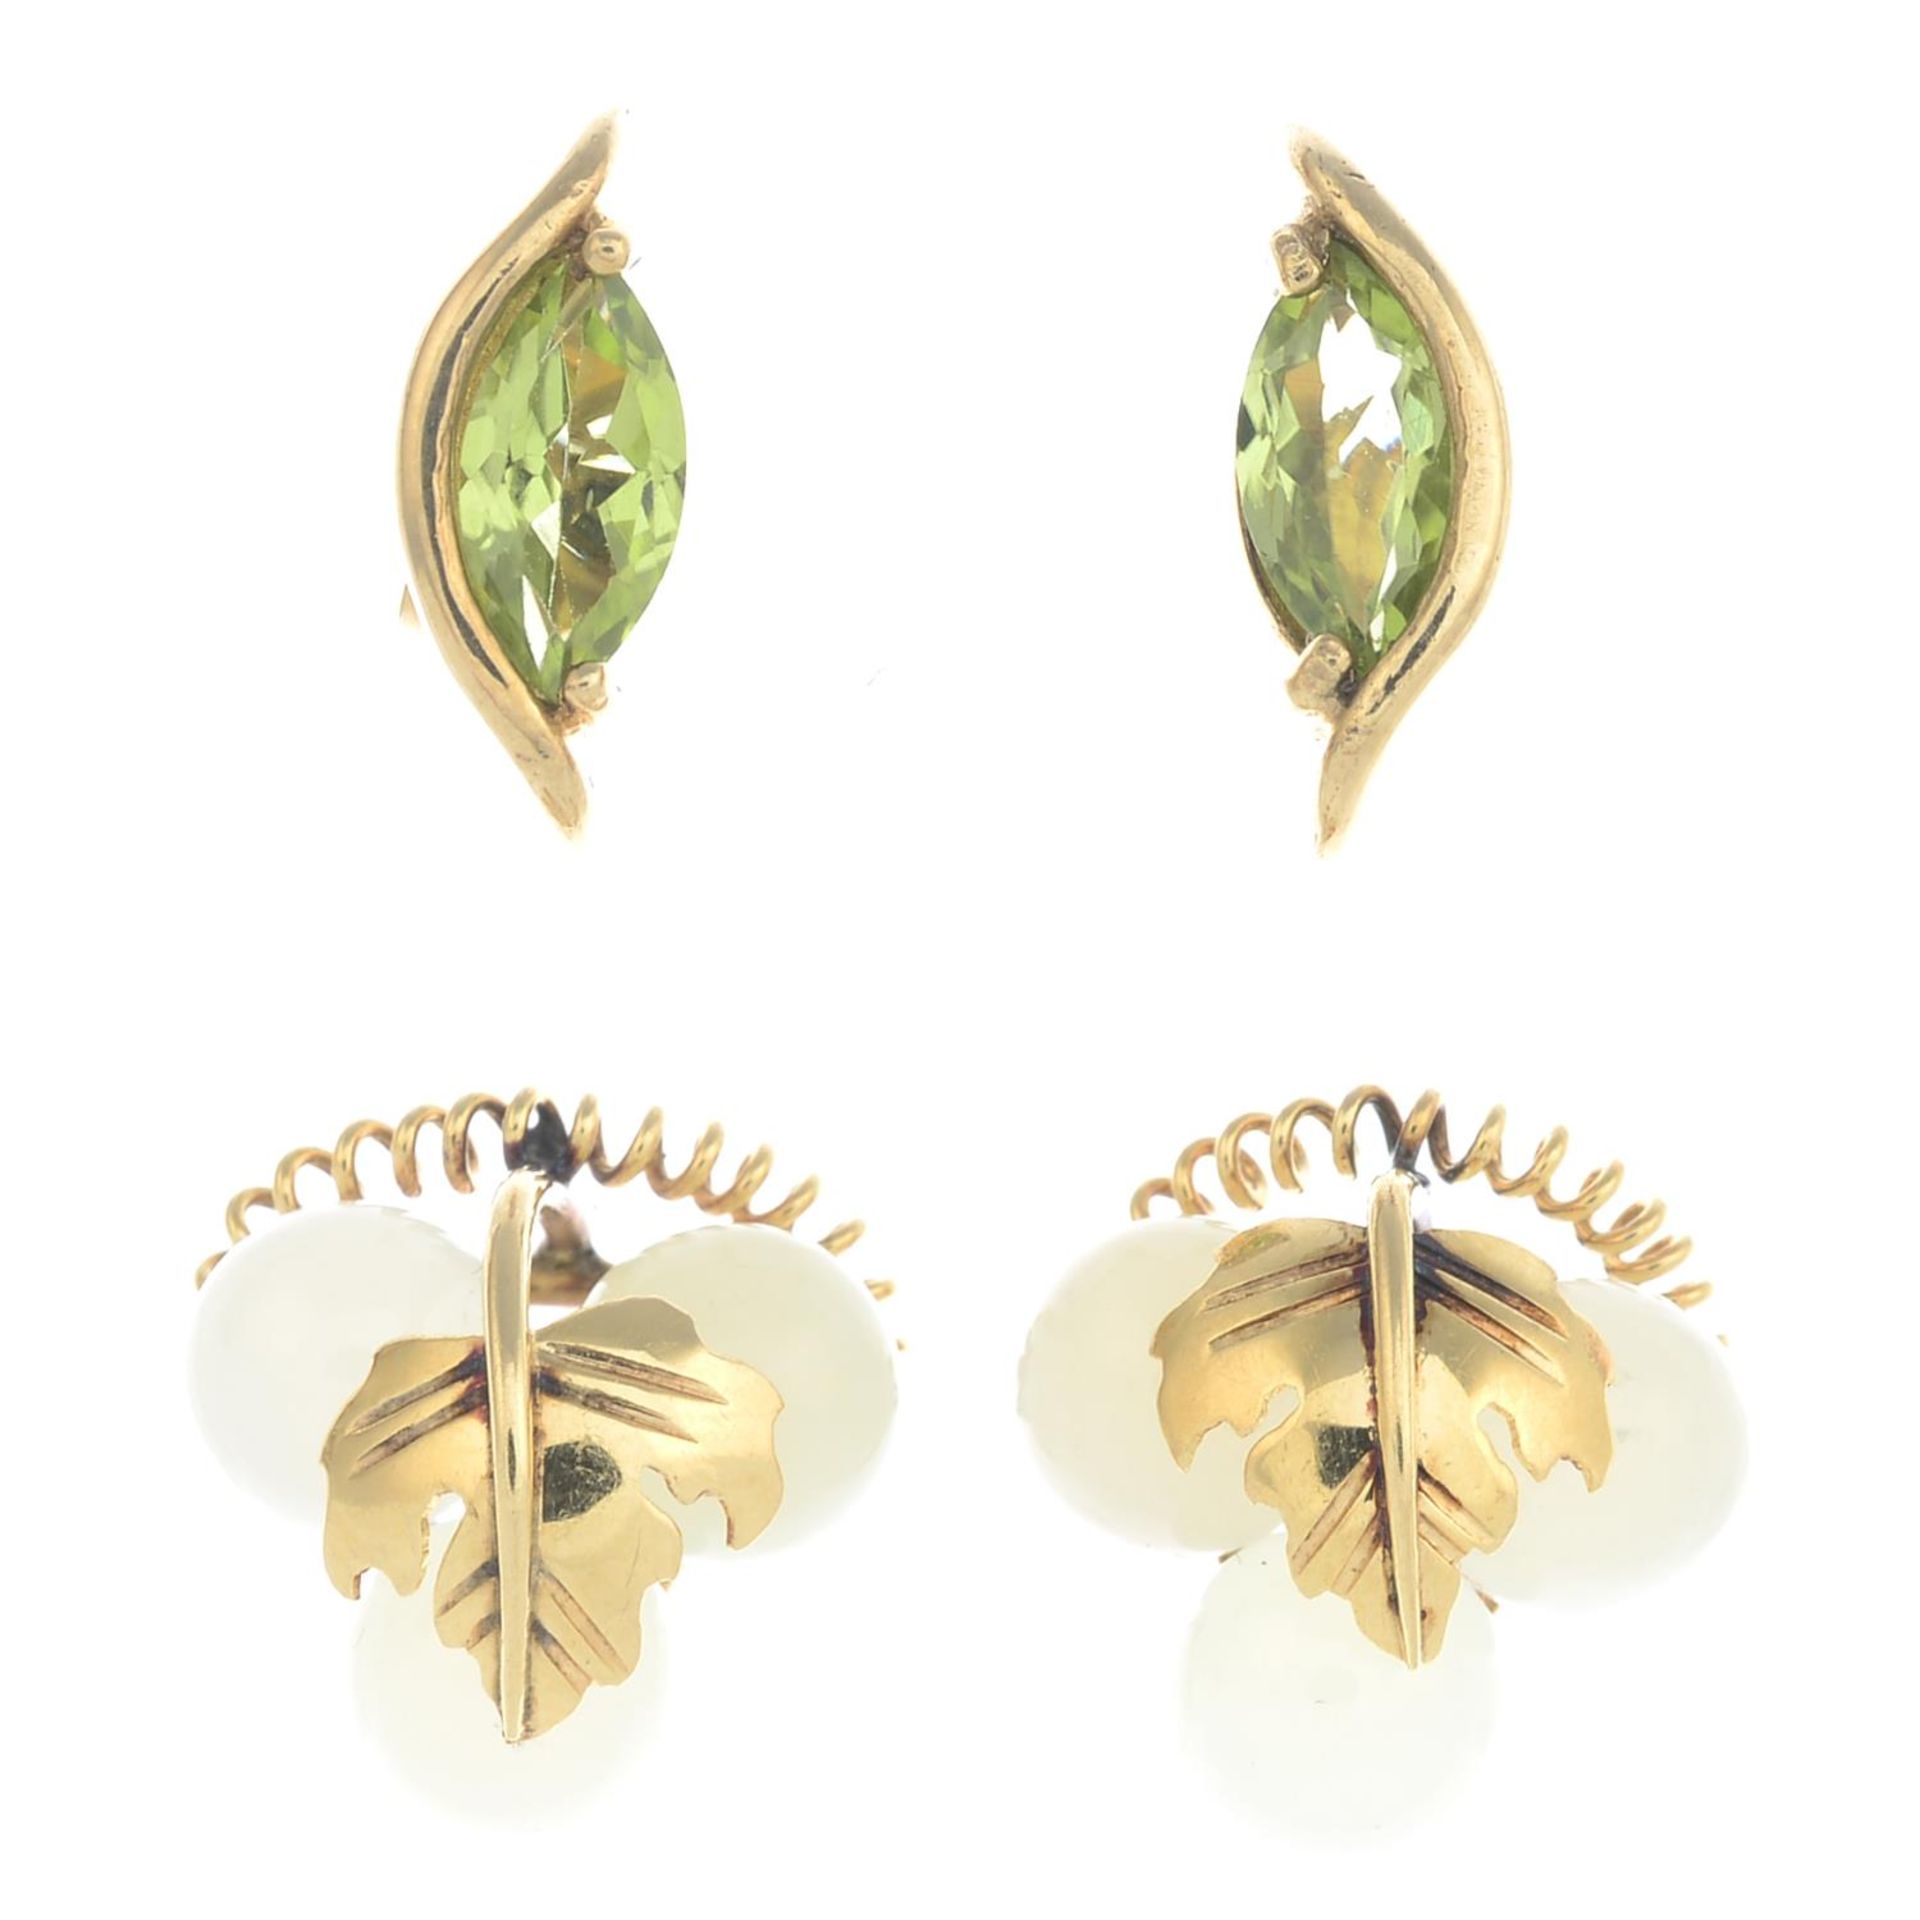 9ct gold peridot stud earrings, hallmarks for 9ct gold, length 1.3cms, 1.9gms.